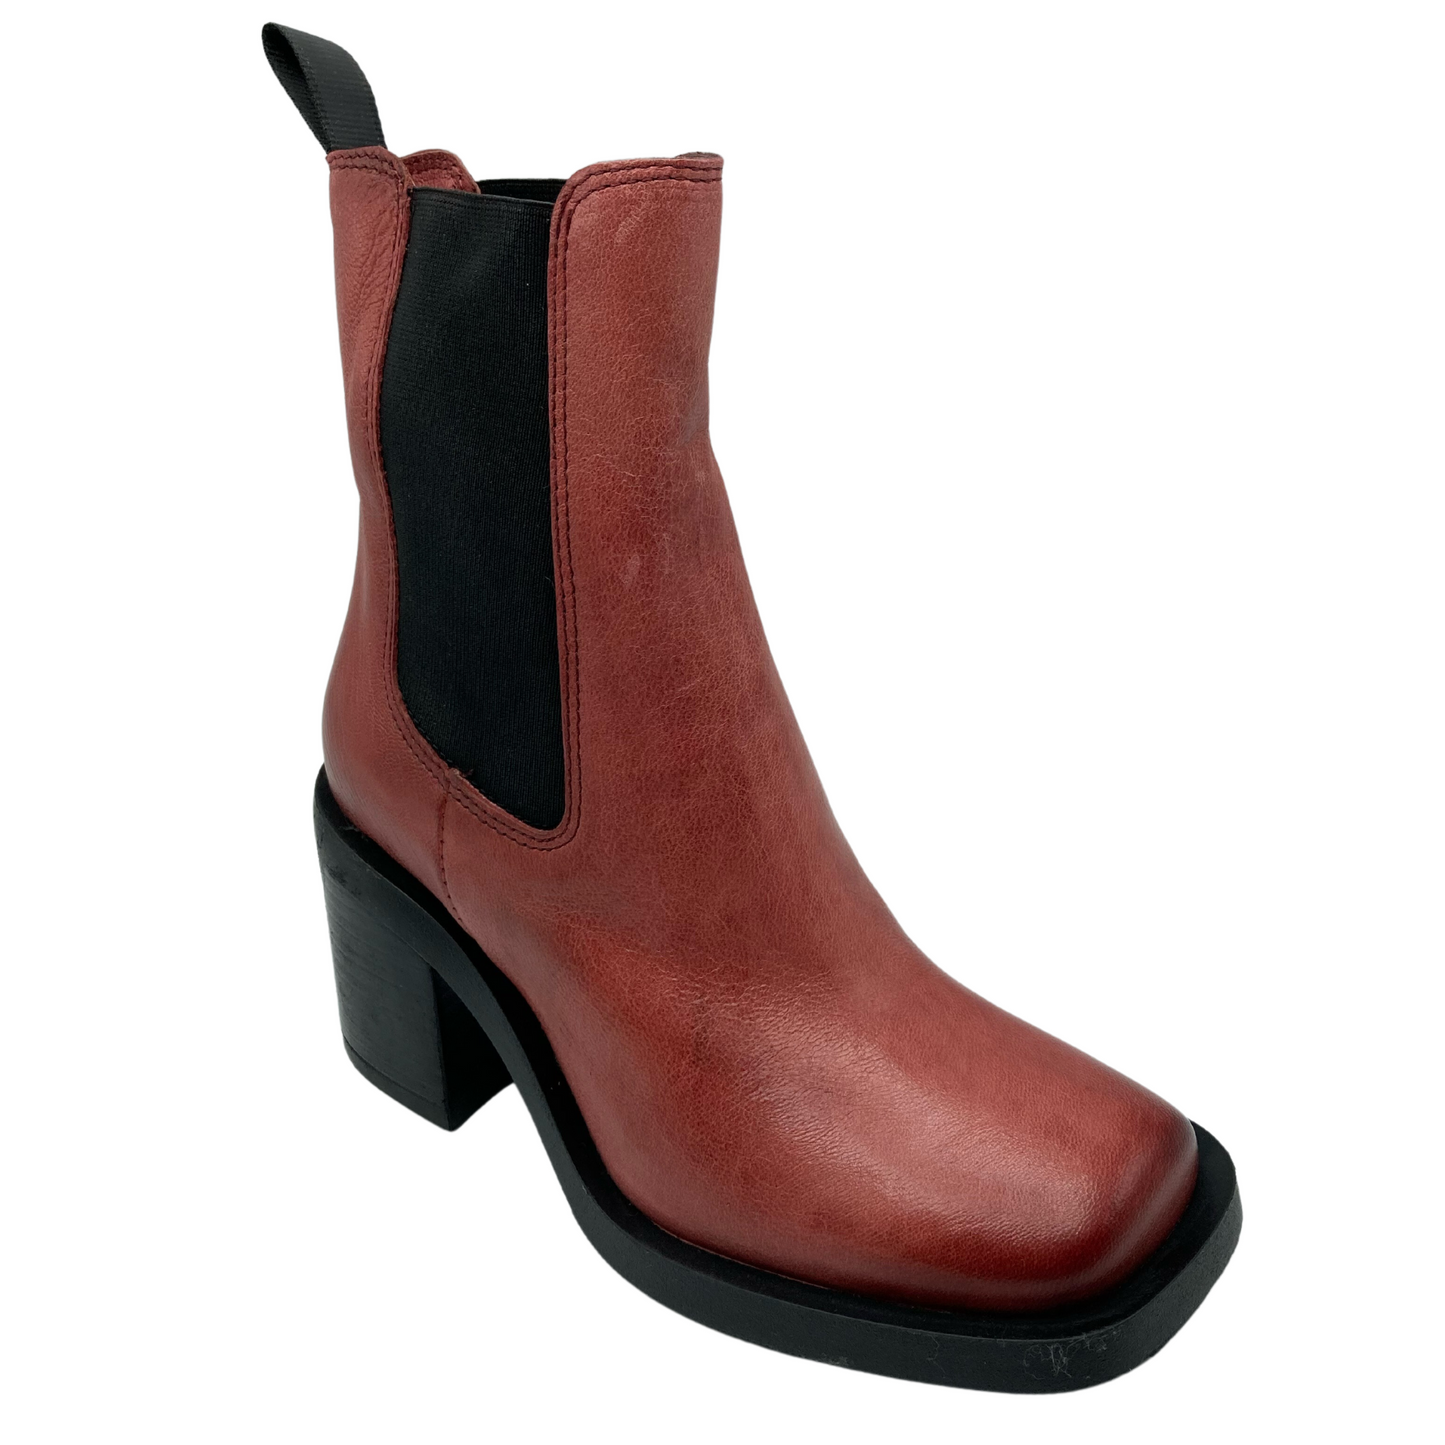 Angled view of mid-calf height boot with black elasticated sides and black pull on tab